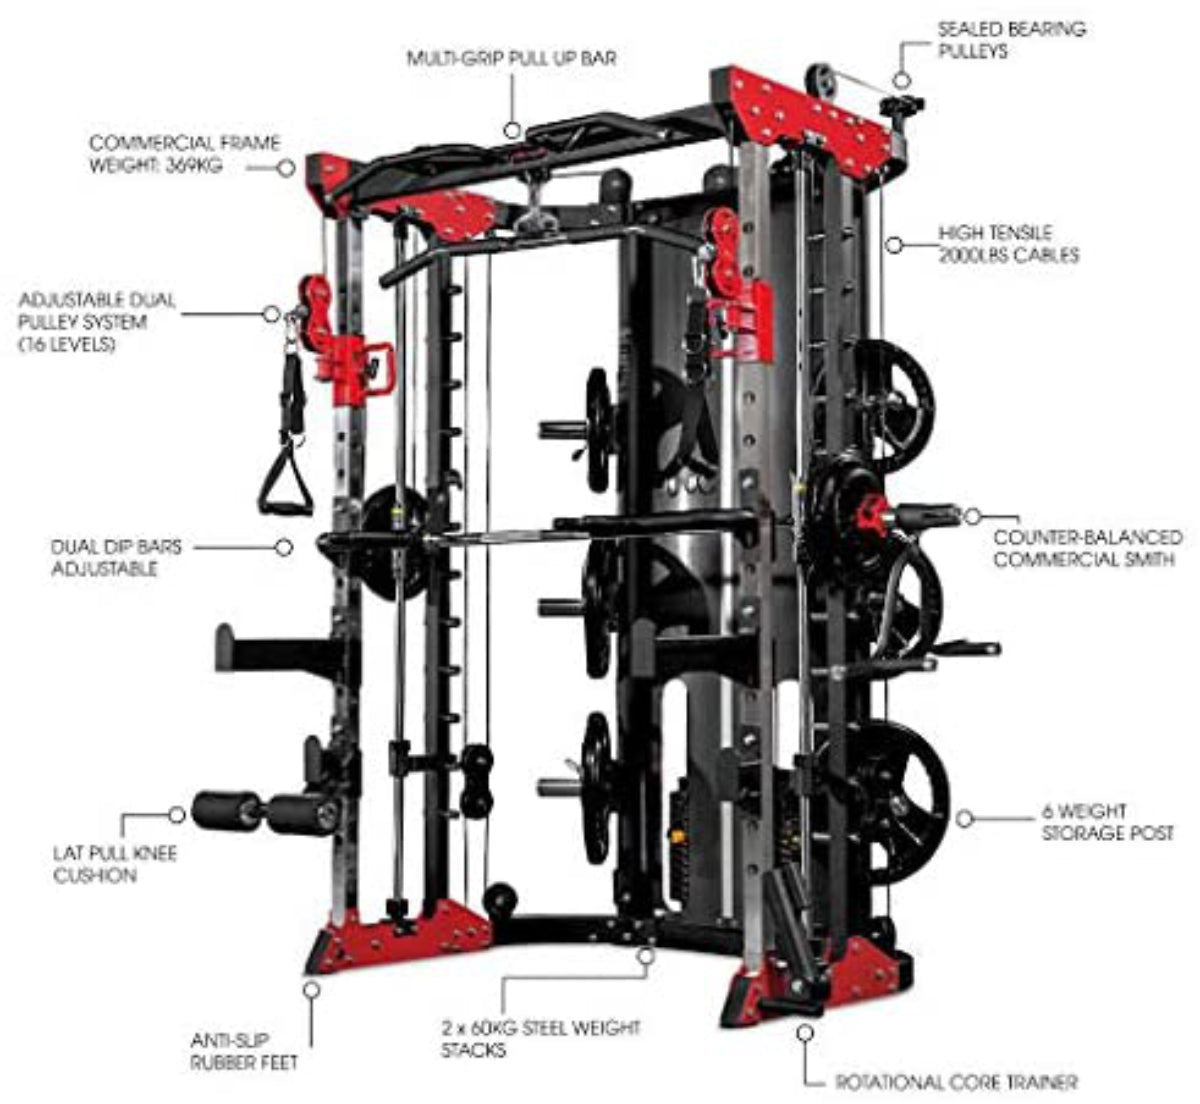 Break down of red smith machine showing main features